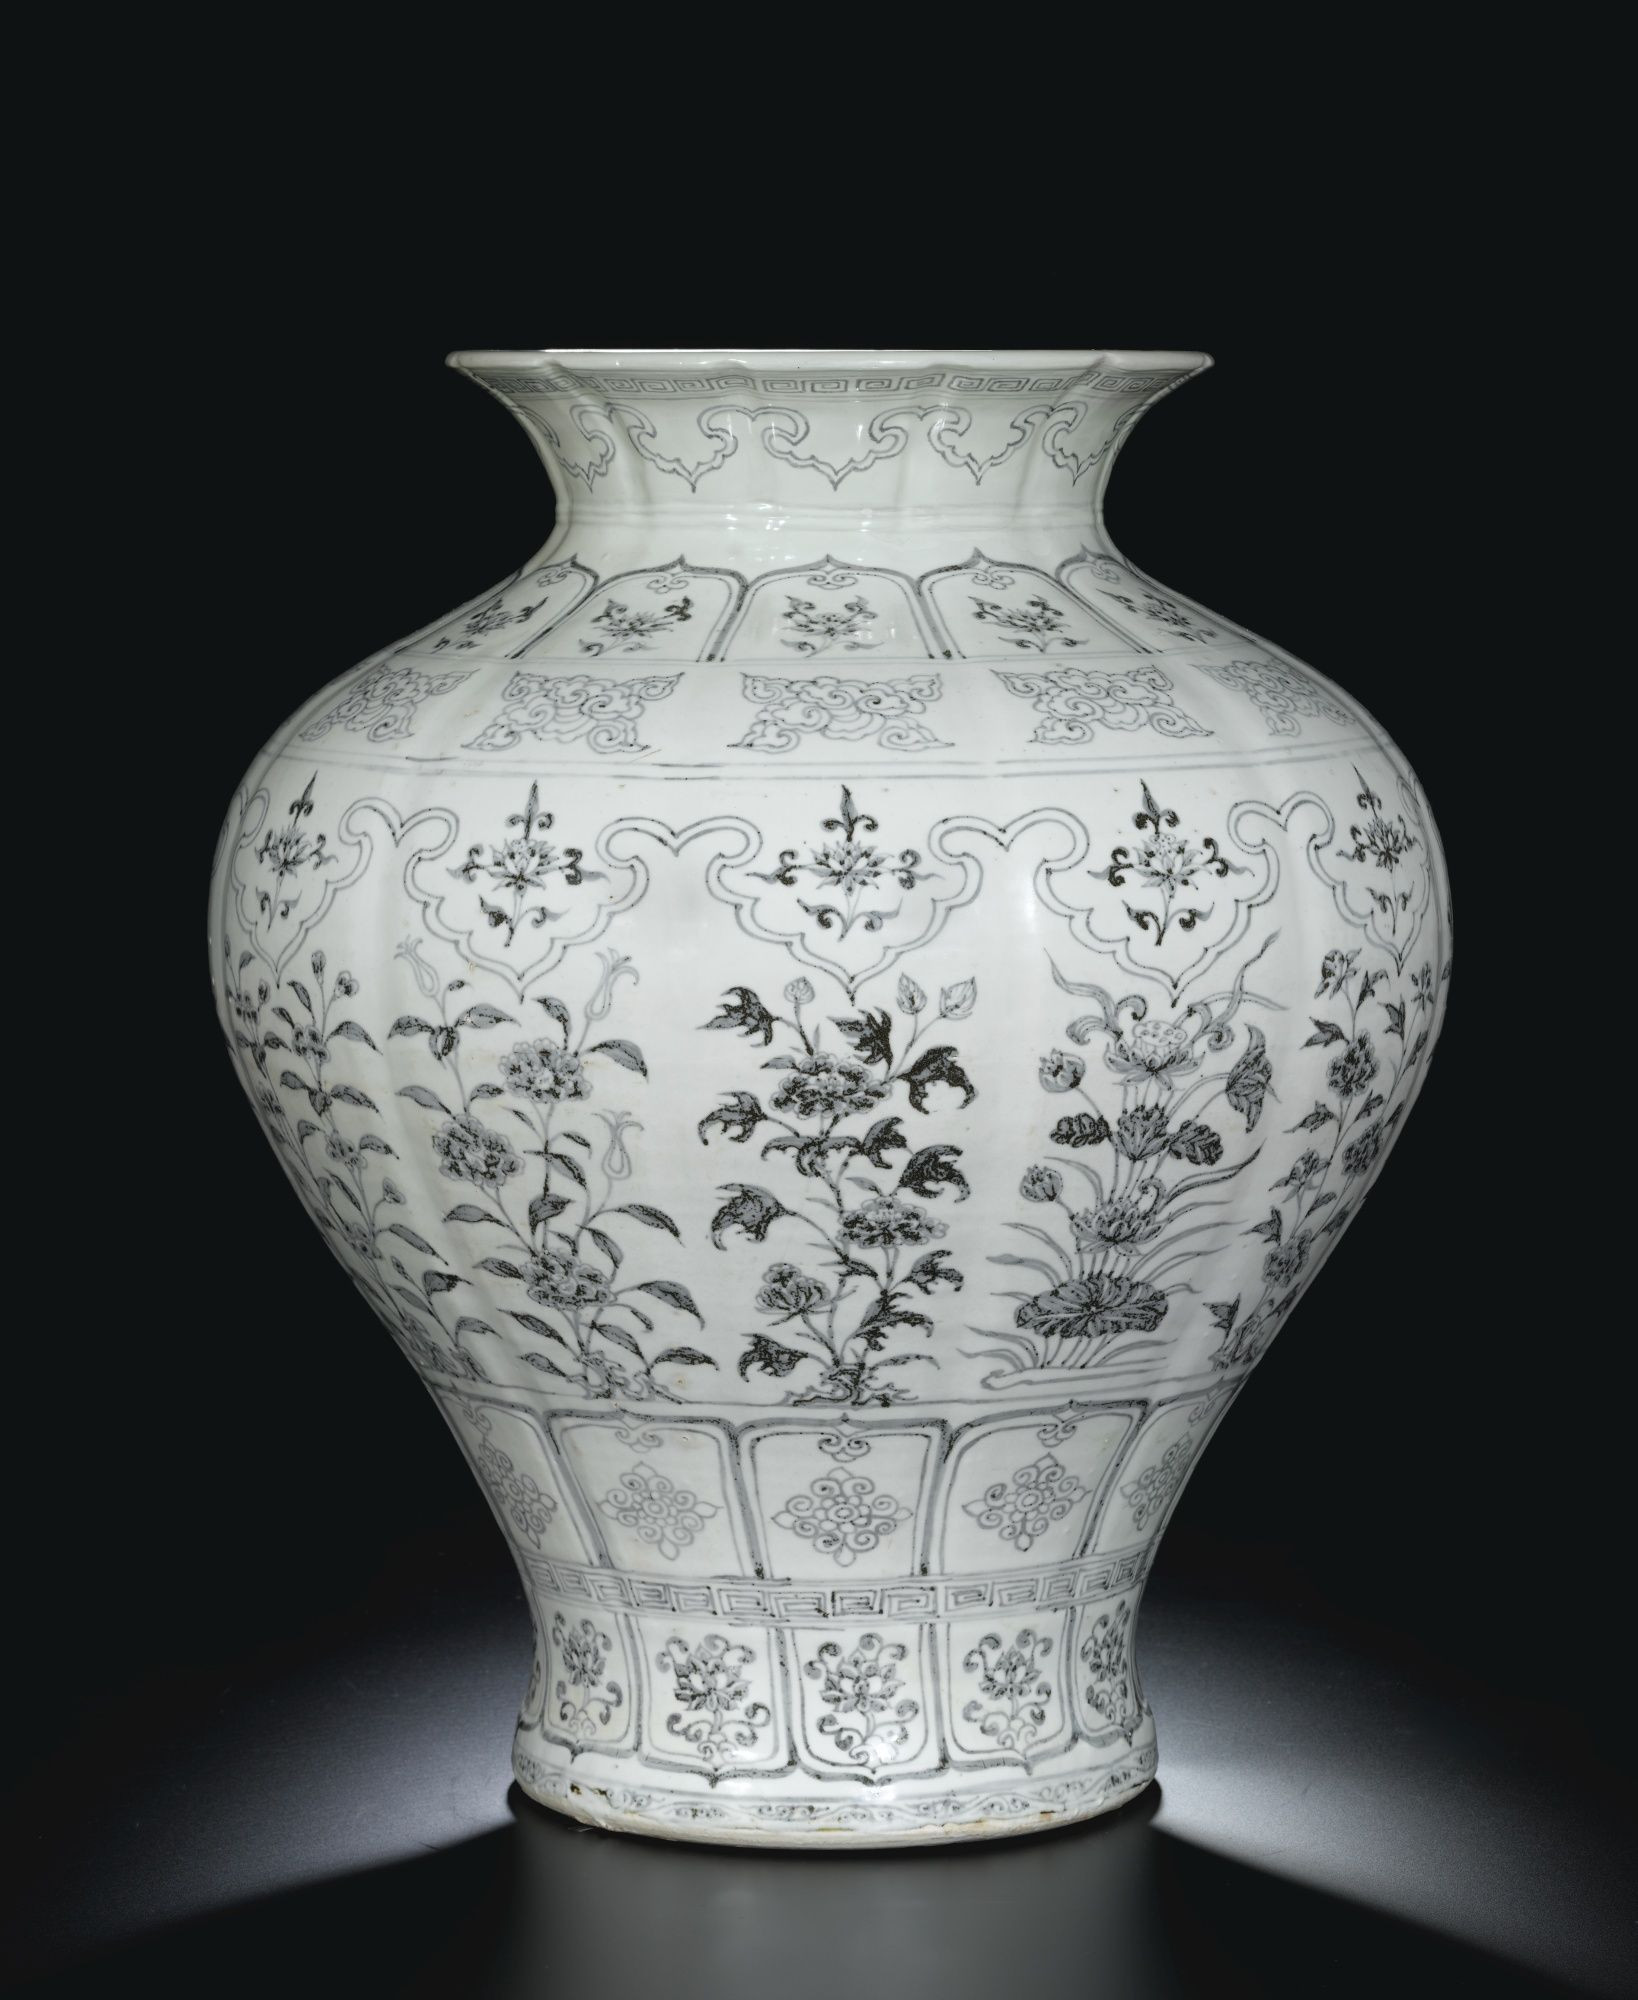 28 Unique Big Chinese Vase 2024 free download big chinese vase of an extremely rare and exceptionally large blue and white jar regarding an extremely rare and exceptionally large blue and white jar shiliuzunming